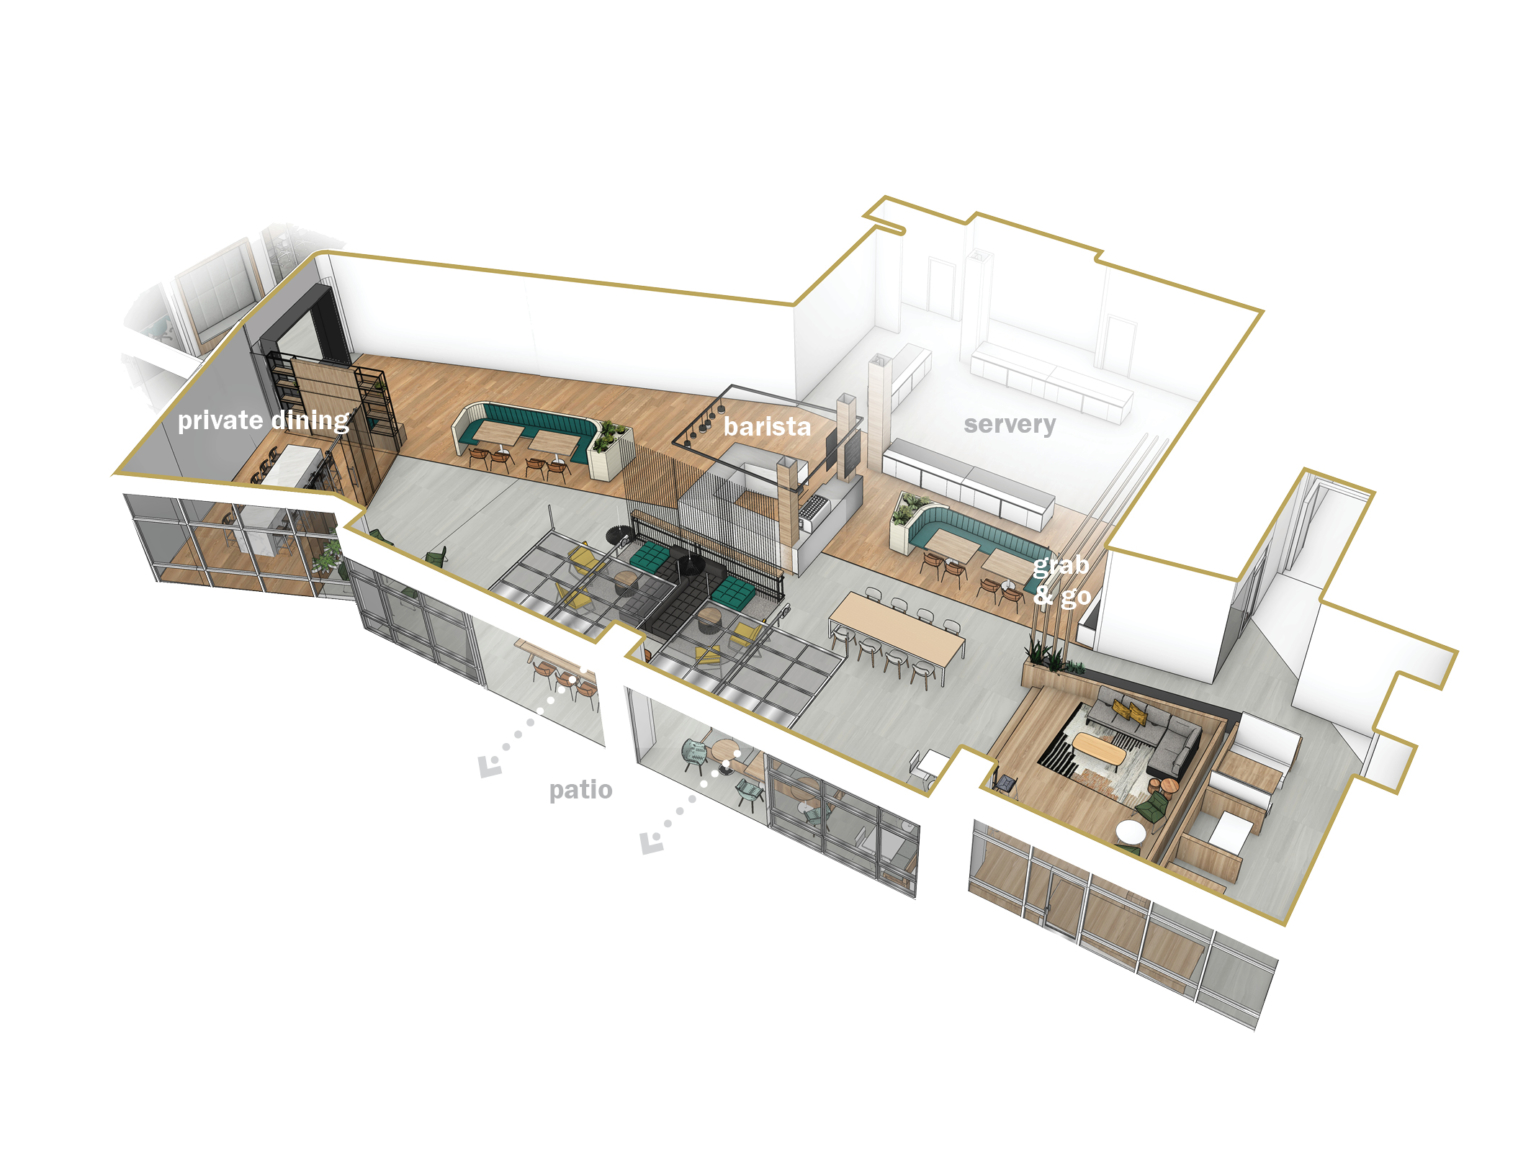 Rendering of white dining space with wood floor from aerial view with labeled sections and arrows pointing out to patio